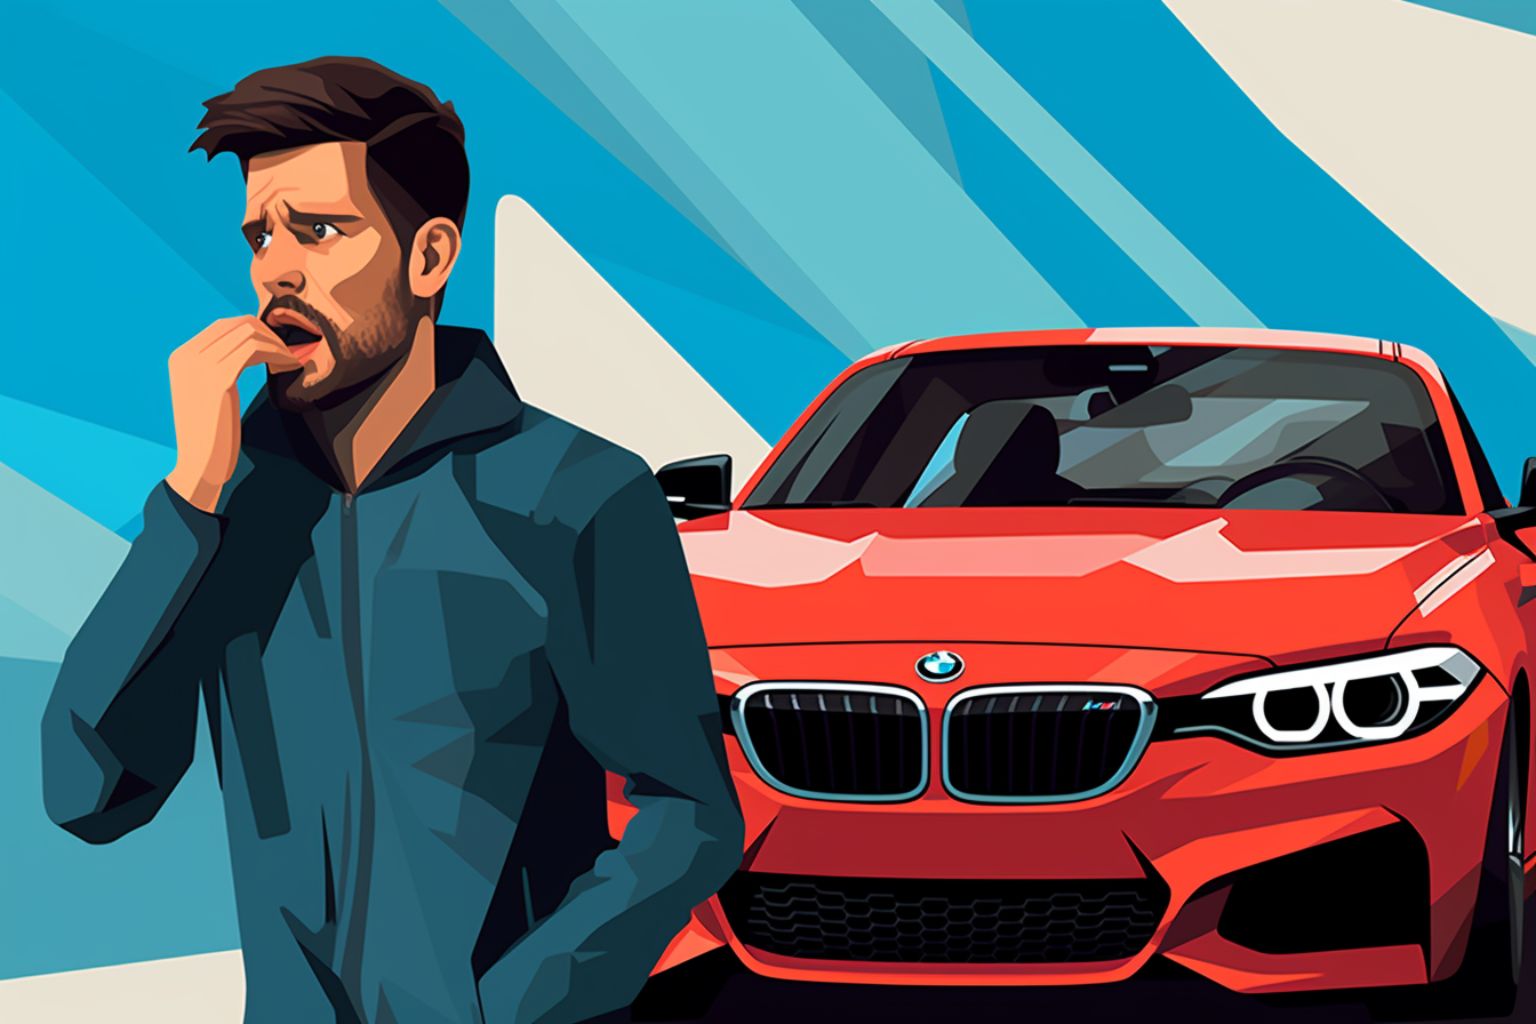 Jim Ogden faced a frustrating ordeal with his new BMW M240i Coupe. Despite a full warranty, the car's persistent issues remained unresolved by the dealership. With the service department unable to fix the vehicle and lemon lawyers hesitant to take on a used car case, Ogden sought external help.